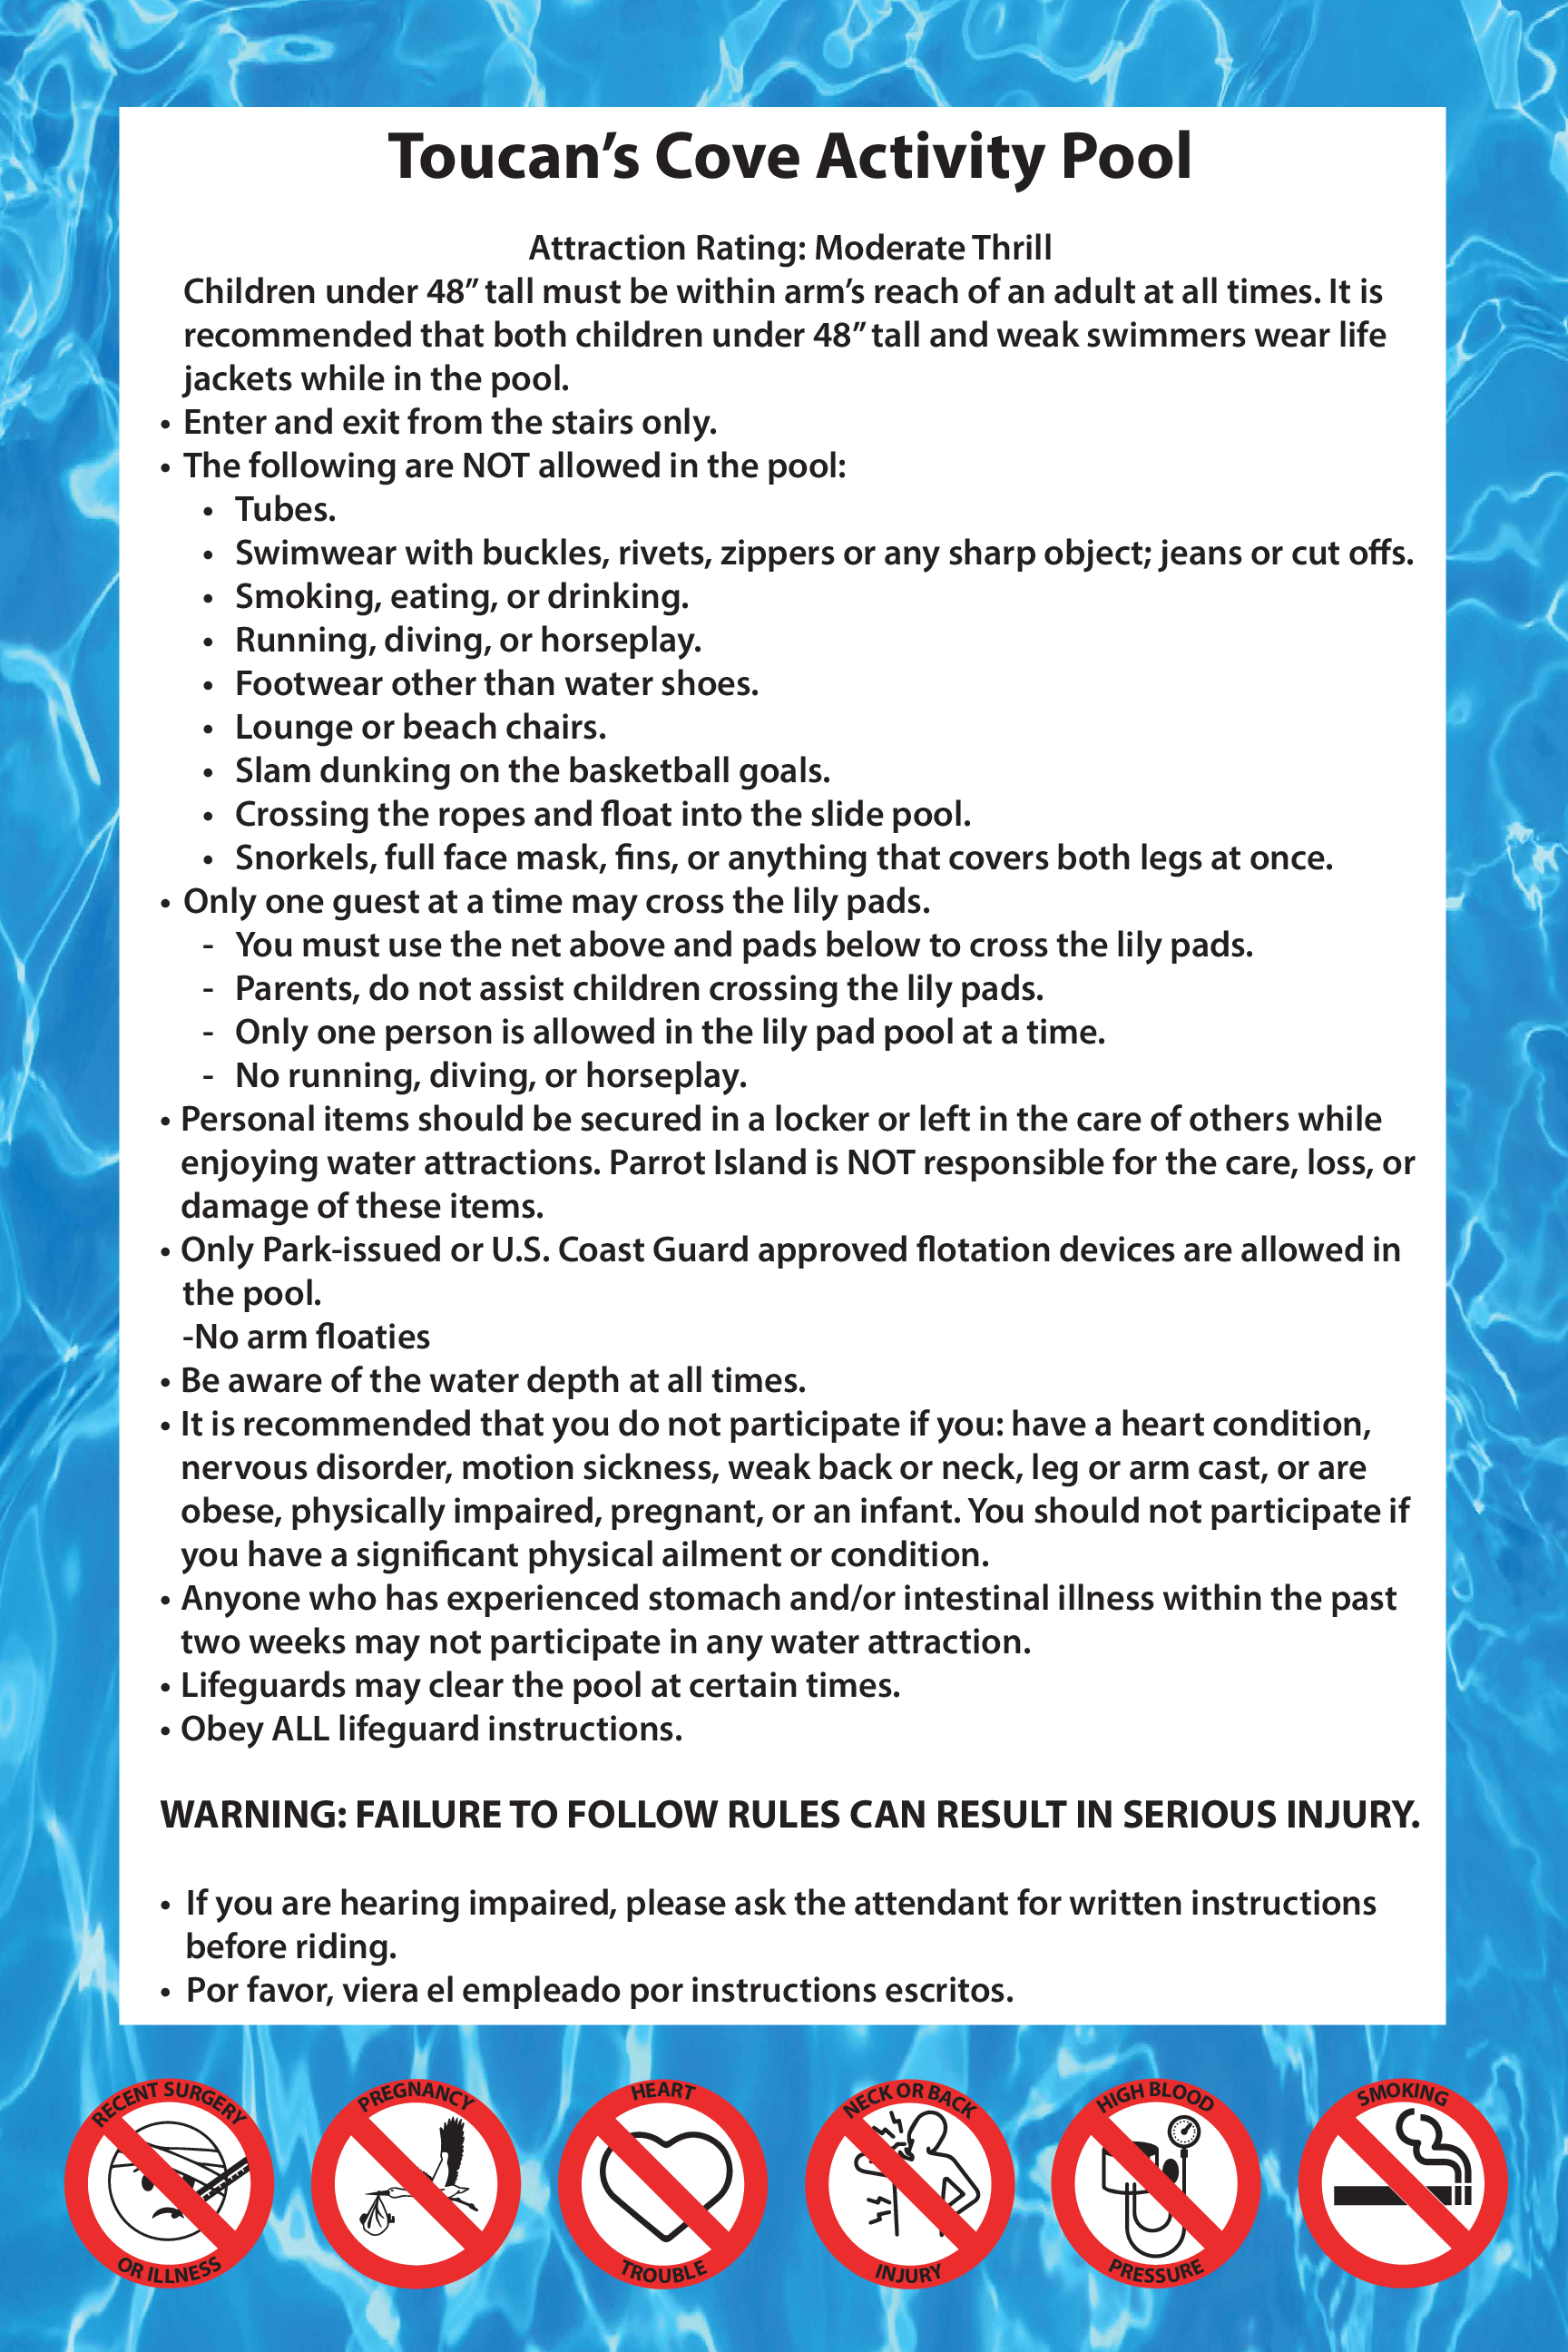 Toucan's Cove Activity Pool Rules 24x36 (1)